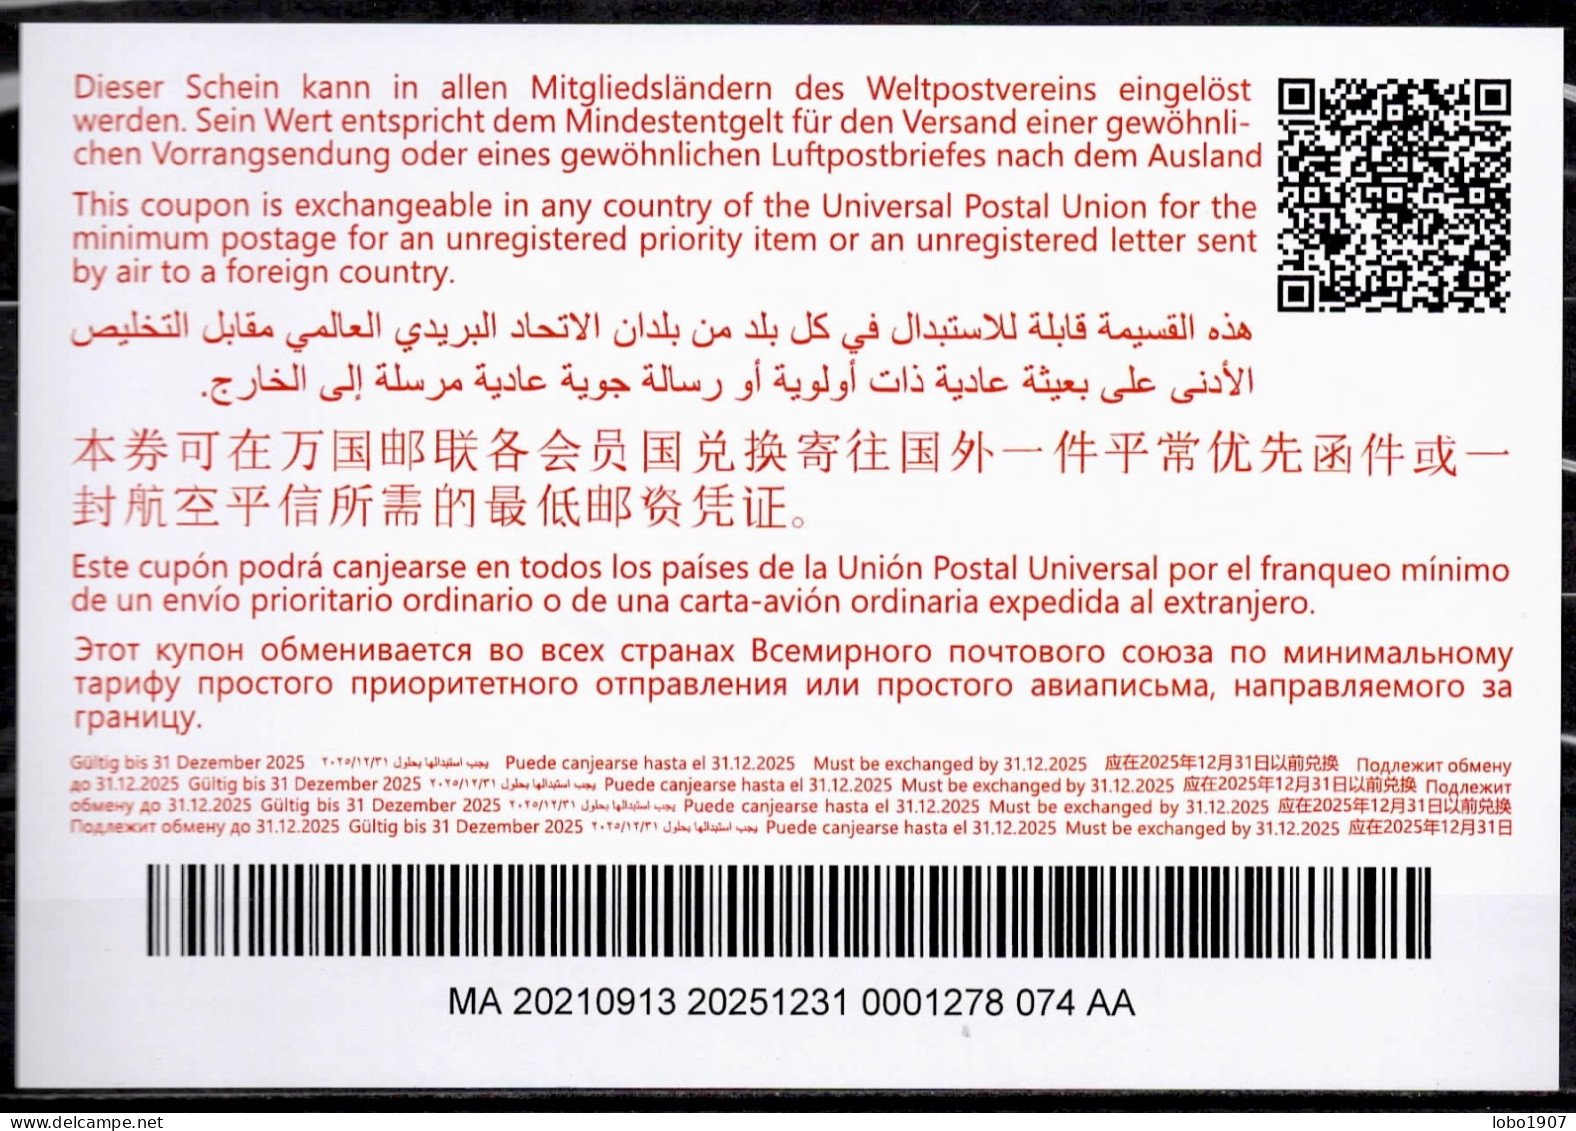 MAROC MOROCCO  Abidjan Ab46A  26,00 DH  20210913 AA  International Reply Coupon Reponse Antwortschein IRC IAS  Mint ** - Morocco (1956-...)